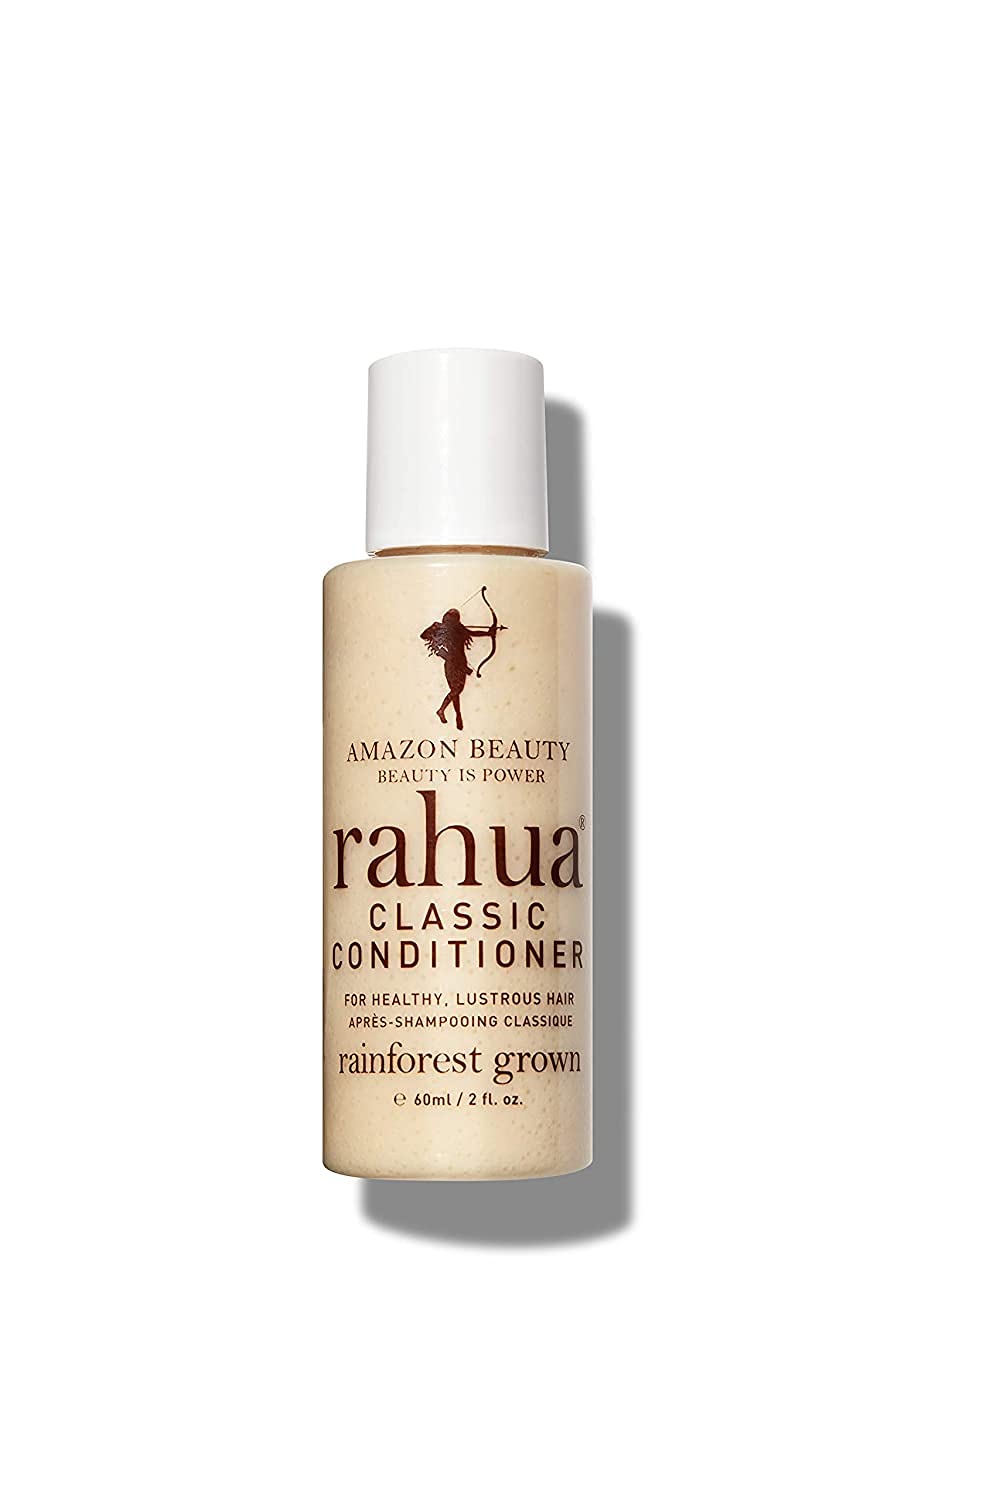 Rahua Classic Conditioner 2 Fl Oz, Made With Organic Ingredients for Healthy Scalp and Hair, Safe for Color Treated Hair, Shampoo with Palo Santo Aroma, Best for All Hair Types - Travel Size, TSA-Approved